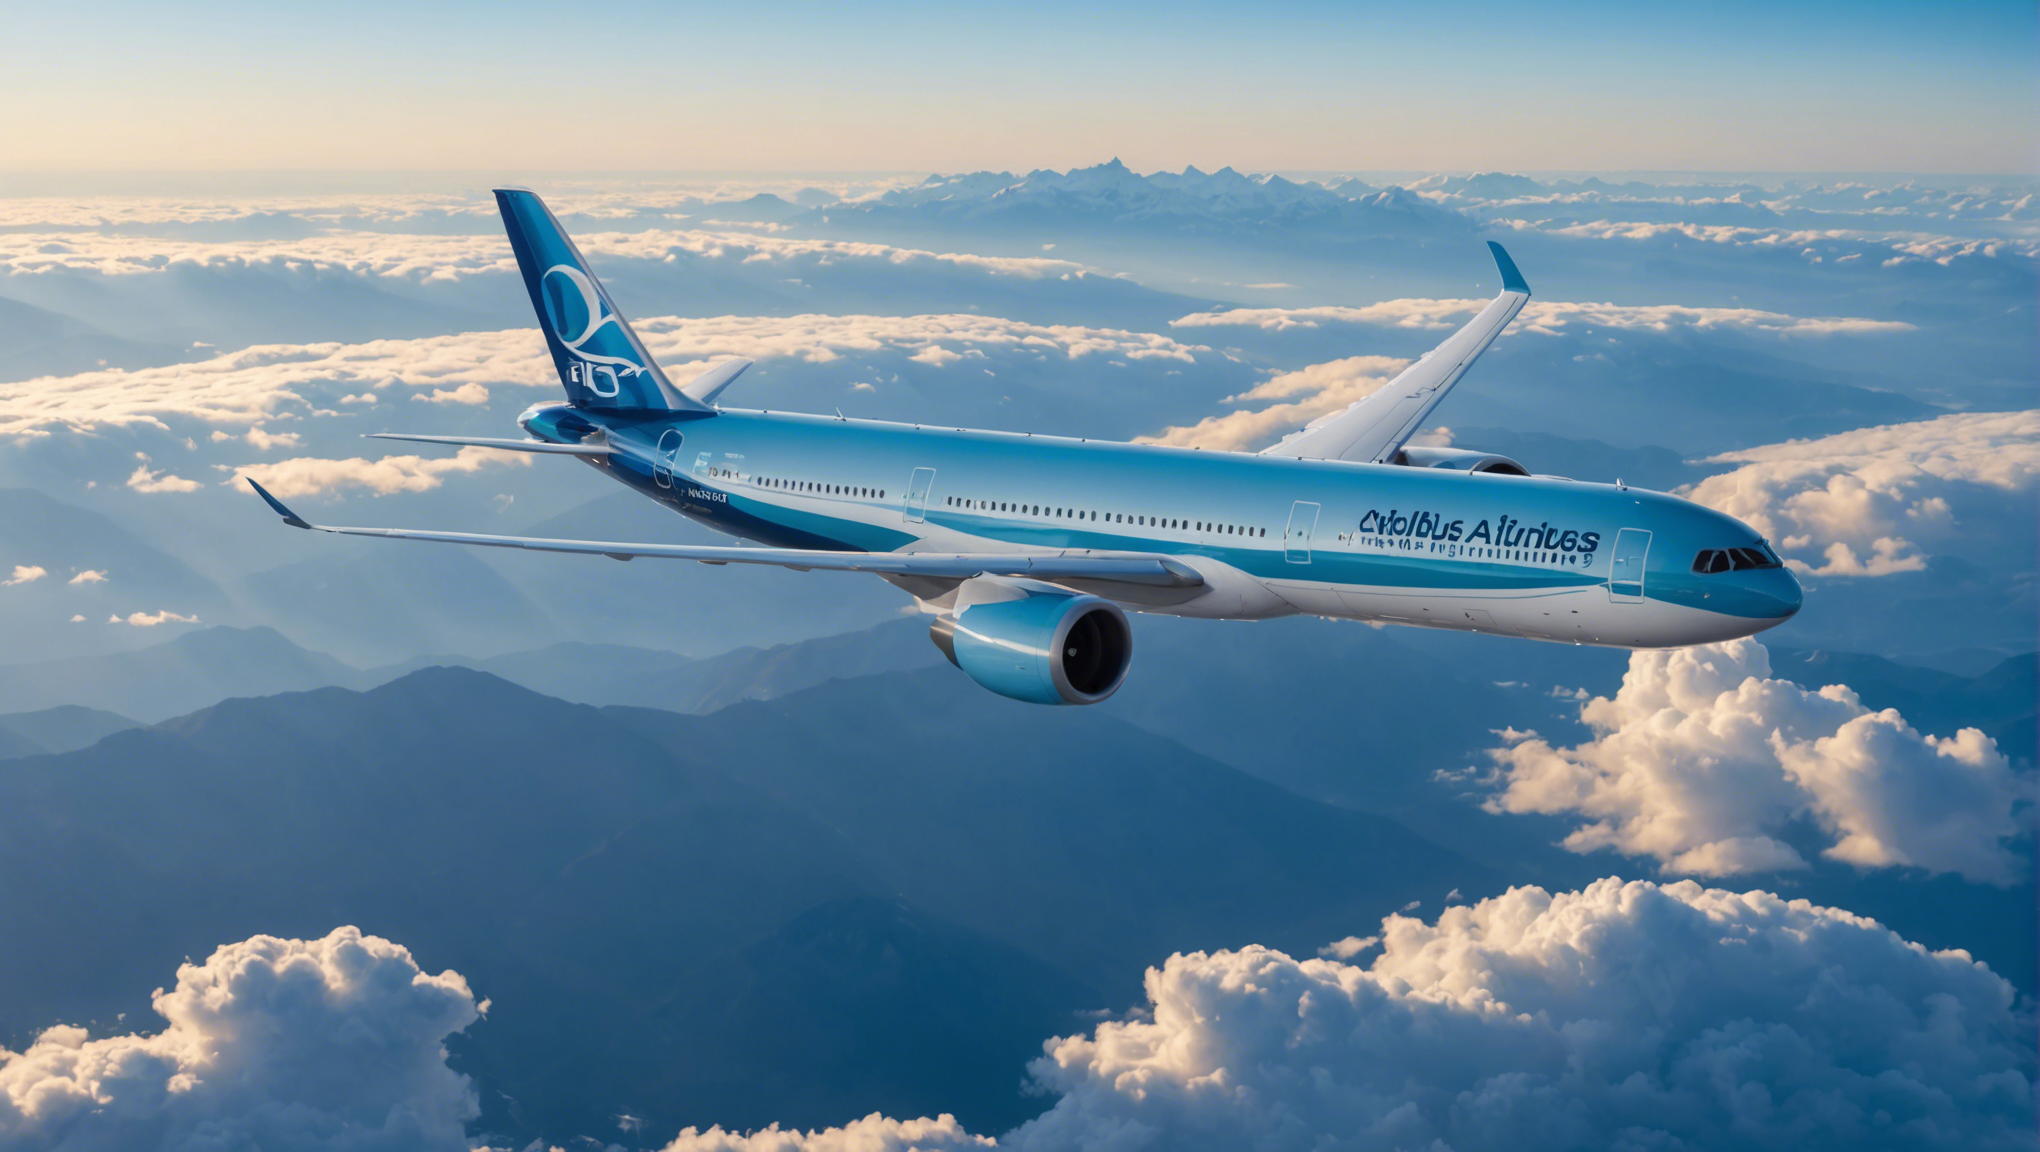 find out how airbus'a330neo distinguished itself in high-altitude tests, a remarkable feat that combines performance and reliability. keep up to date with airbus'aviation advances.